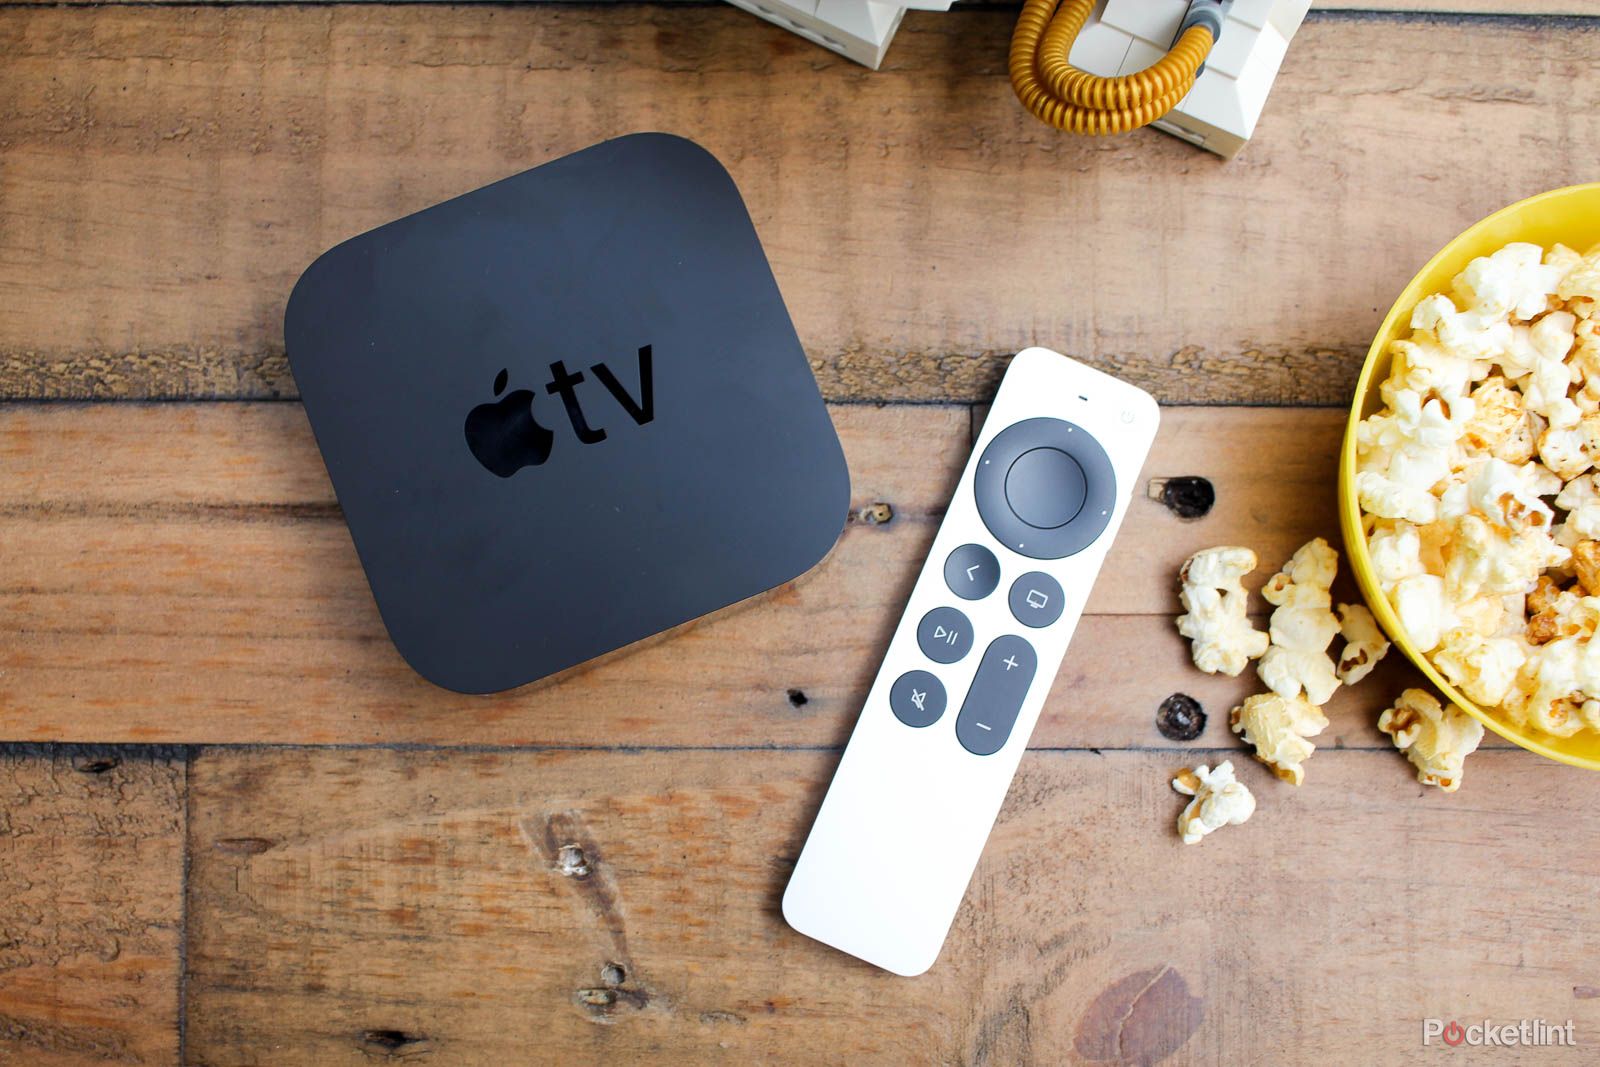 Apple TV and remote control on wooden table with popcorn